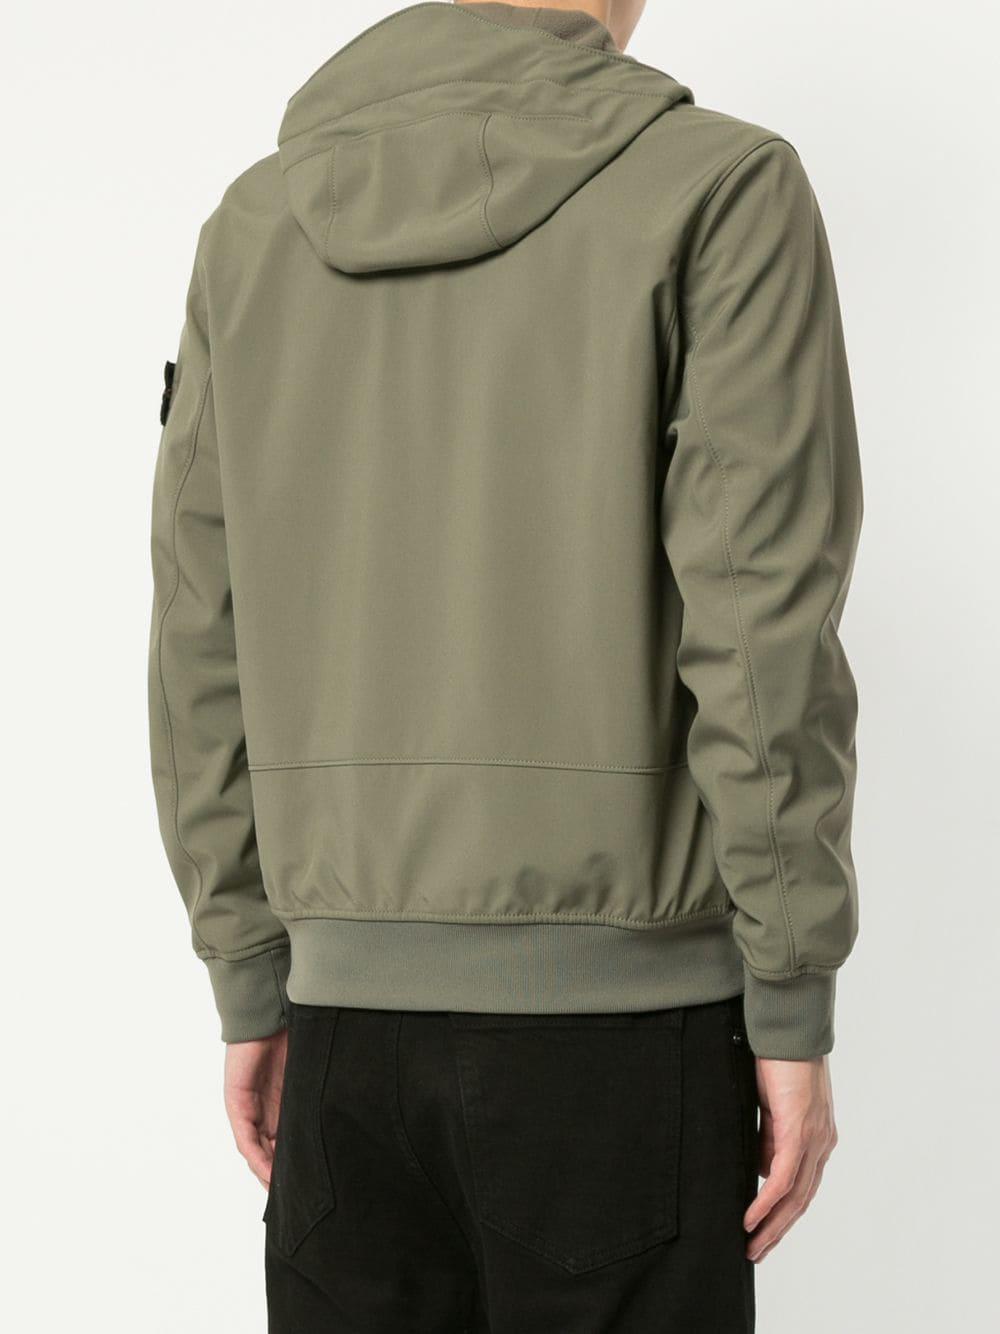 Stone Island Synthetic Q0522 Soft Shell-r Jacket in Green for Men 